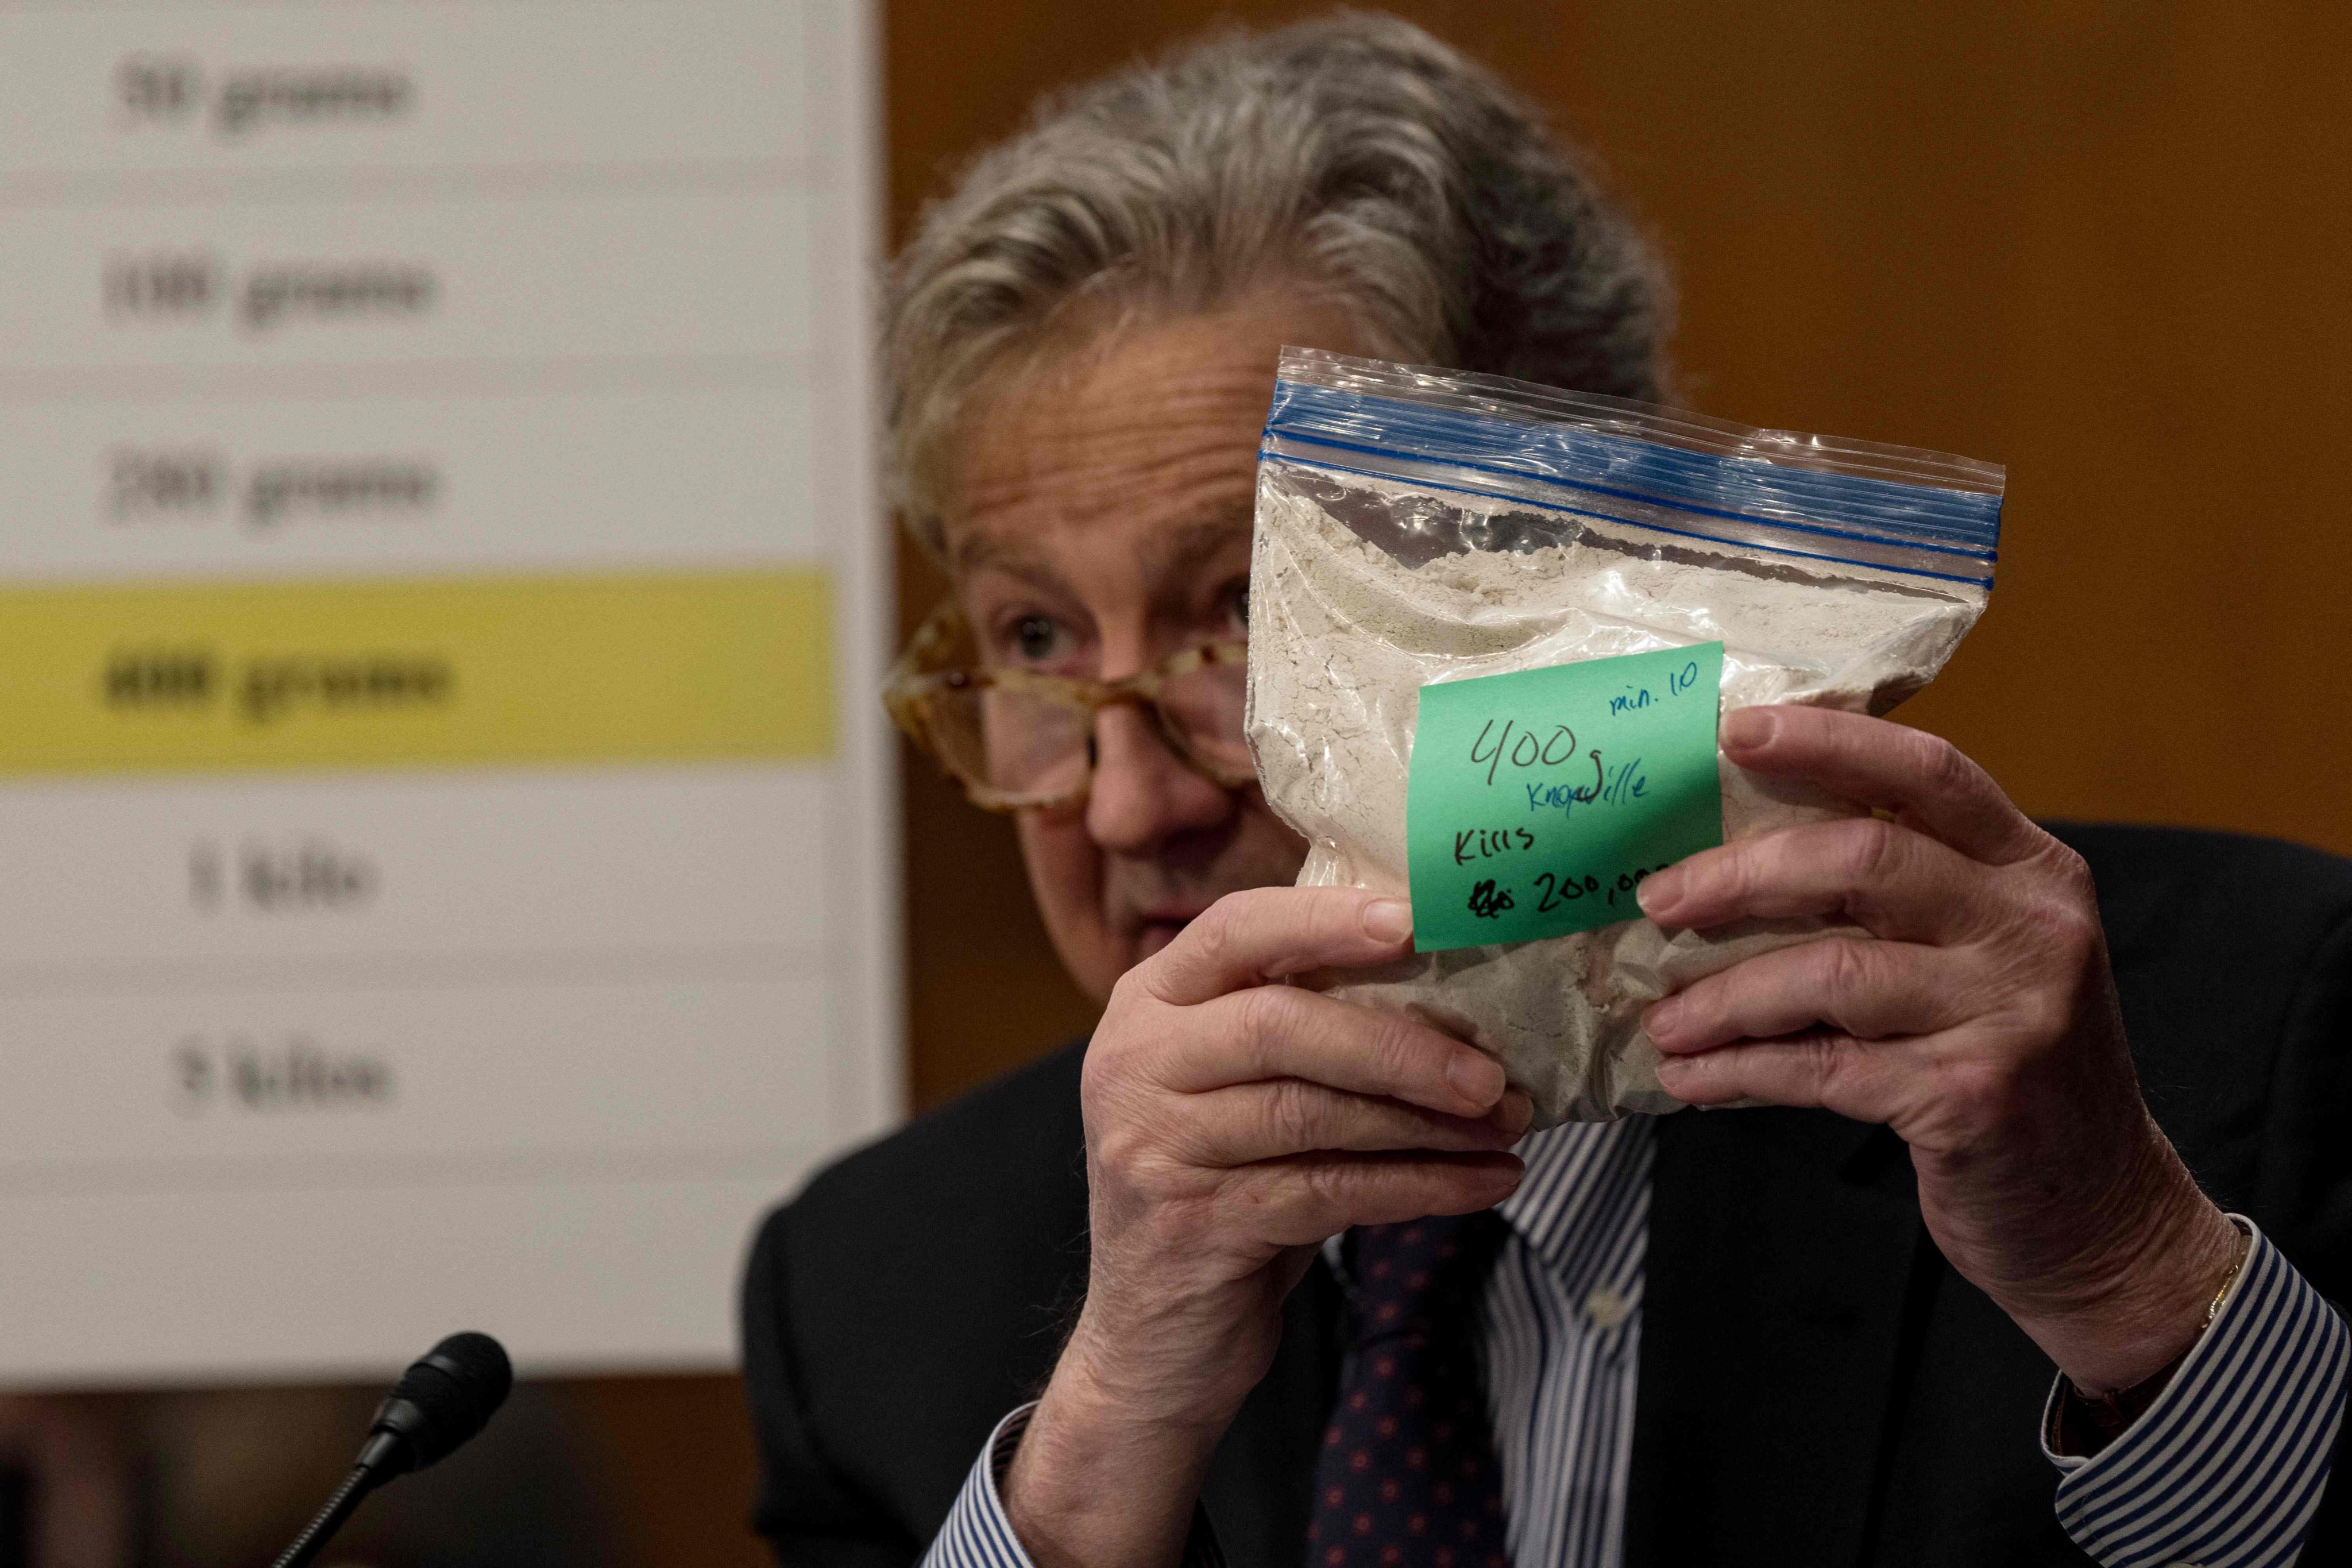 US Senator John Kennedy, Republican of Louisiana, holds up a bag representing 400g of fentanyl as he speaks during a hearing on January 11 in Washington. Photo: Getty Images via AFP